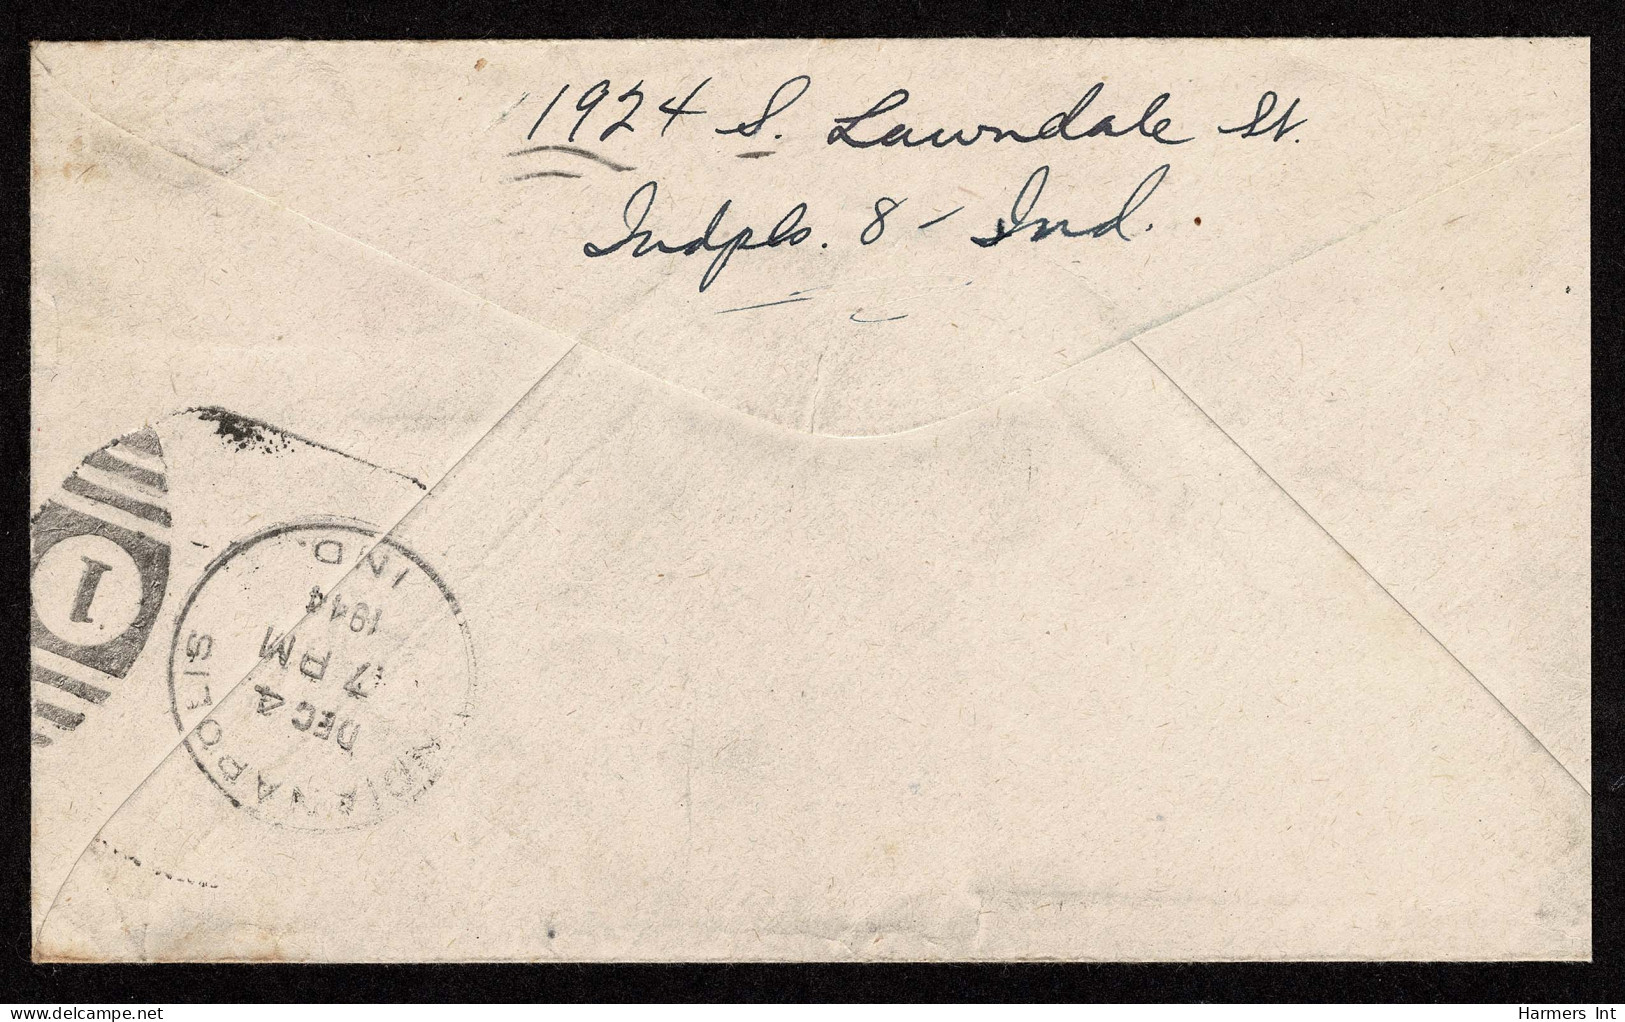 Lot # 136 Special Delivery: 1938, 16¢ Lincoln Black - Covers & Documents